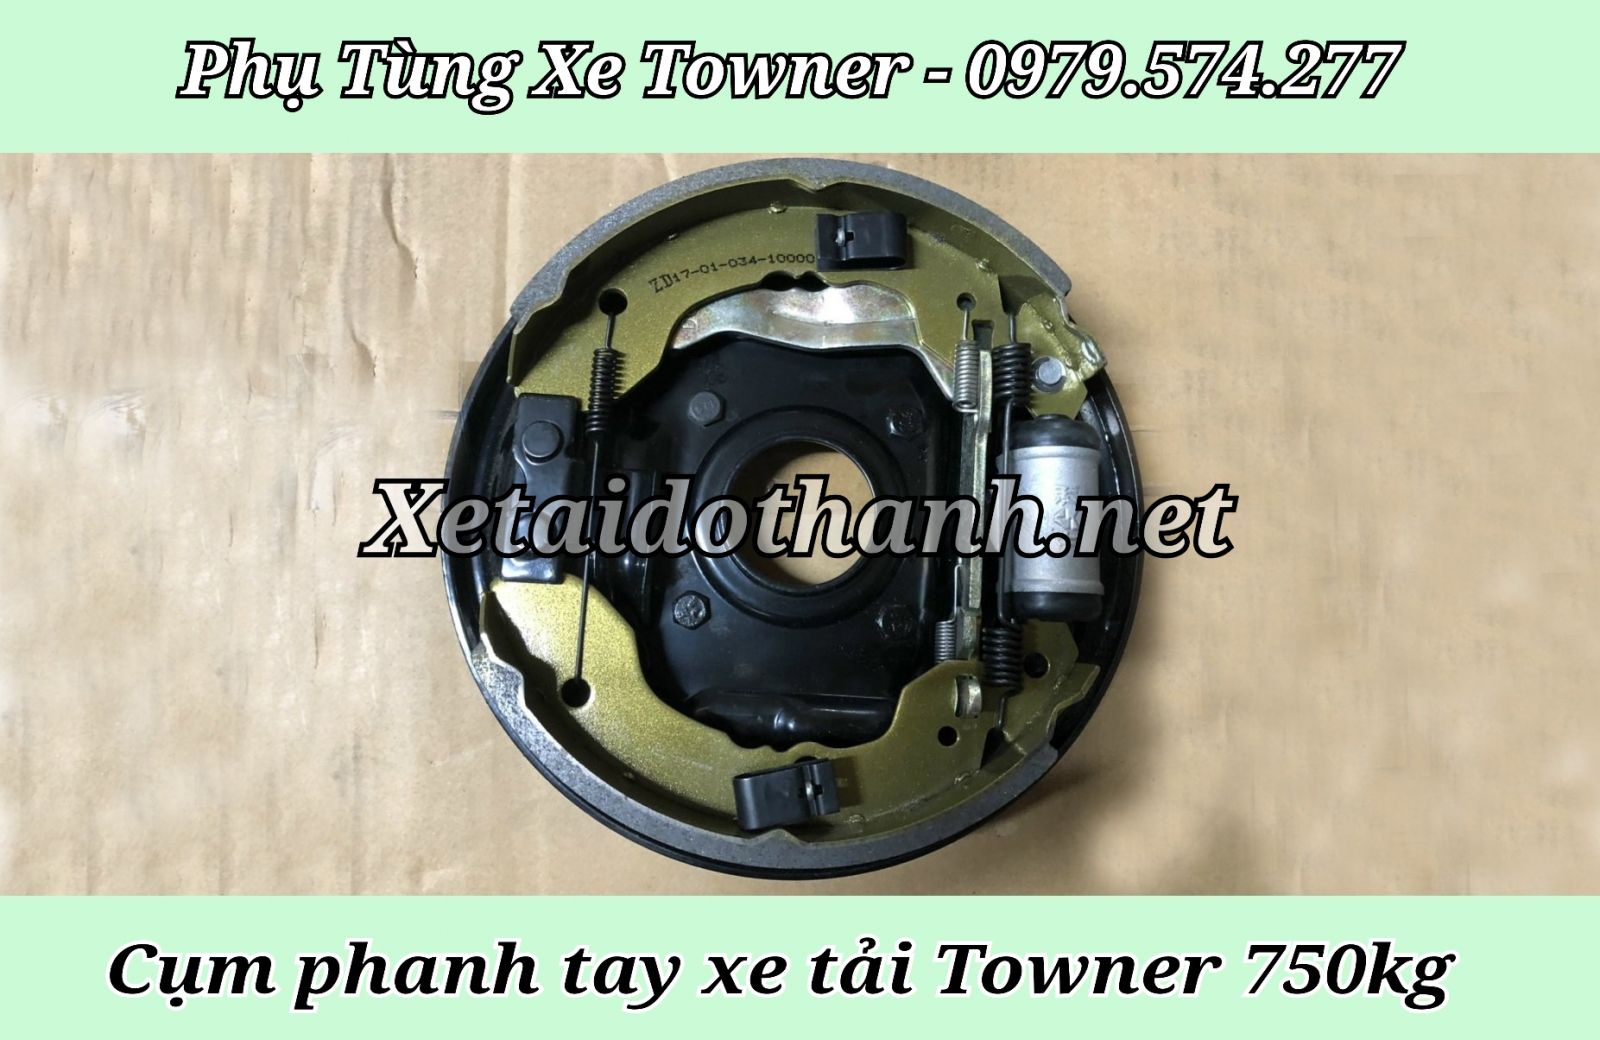 TAM DUNG XE TOWNER 750KG